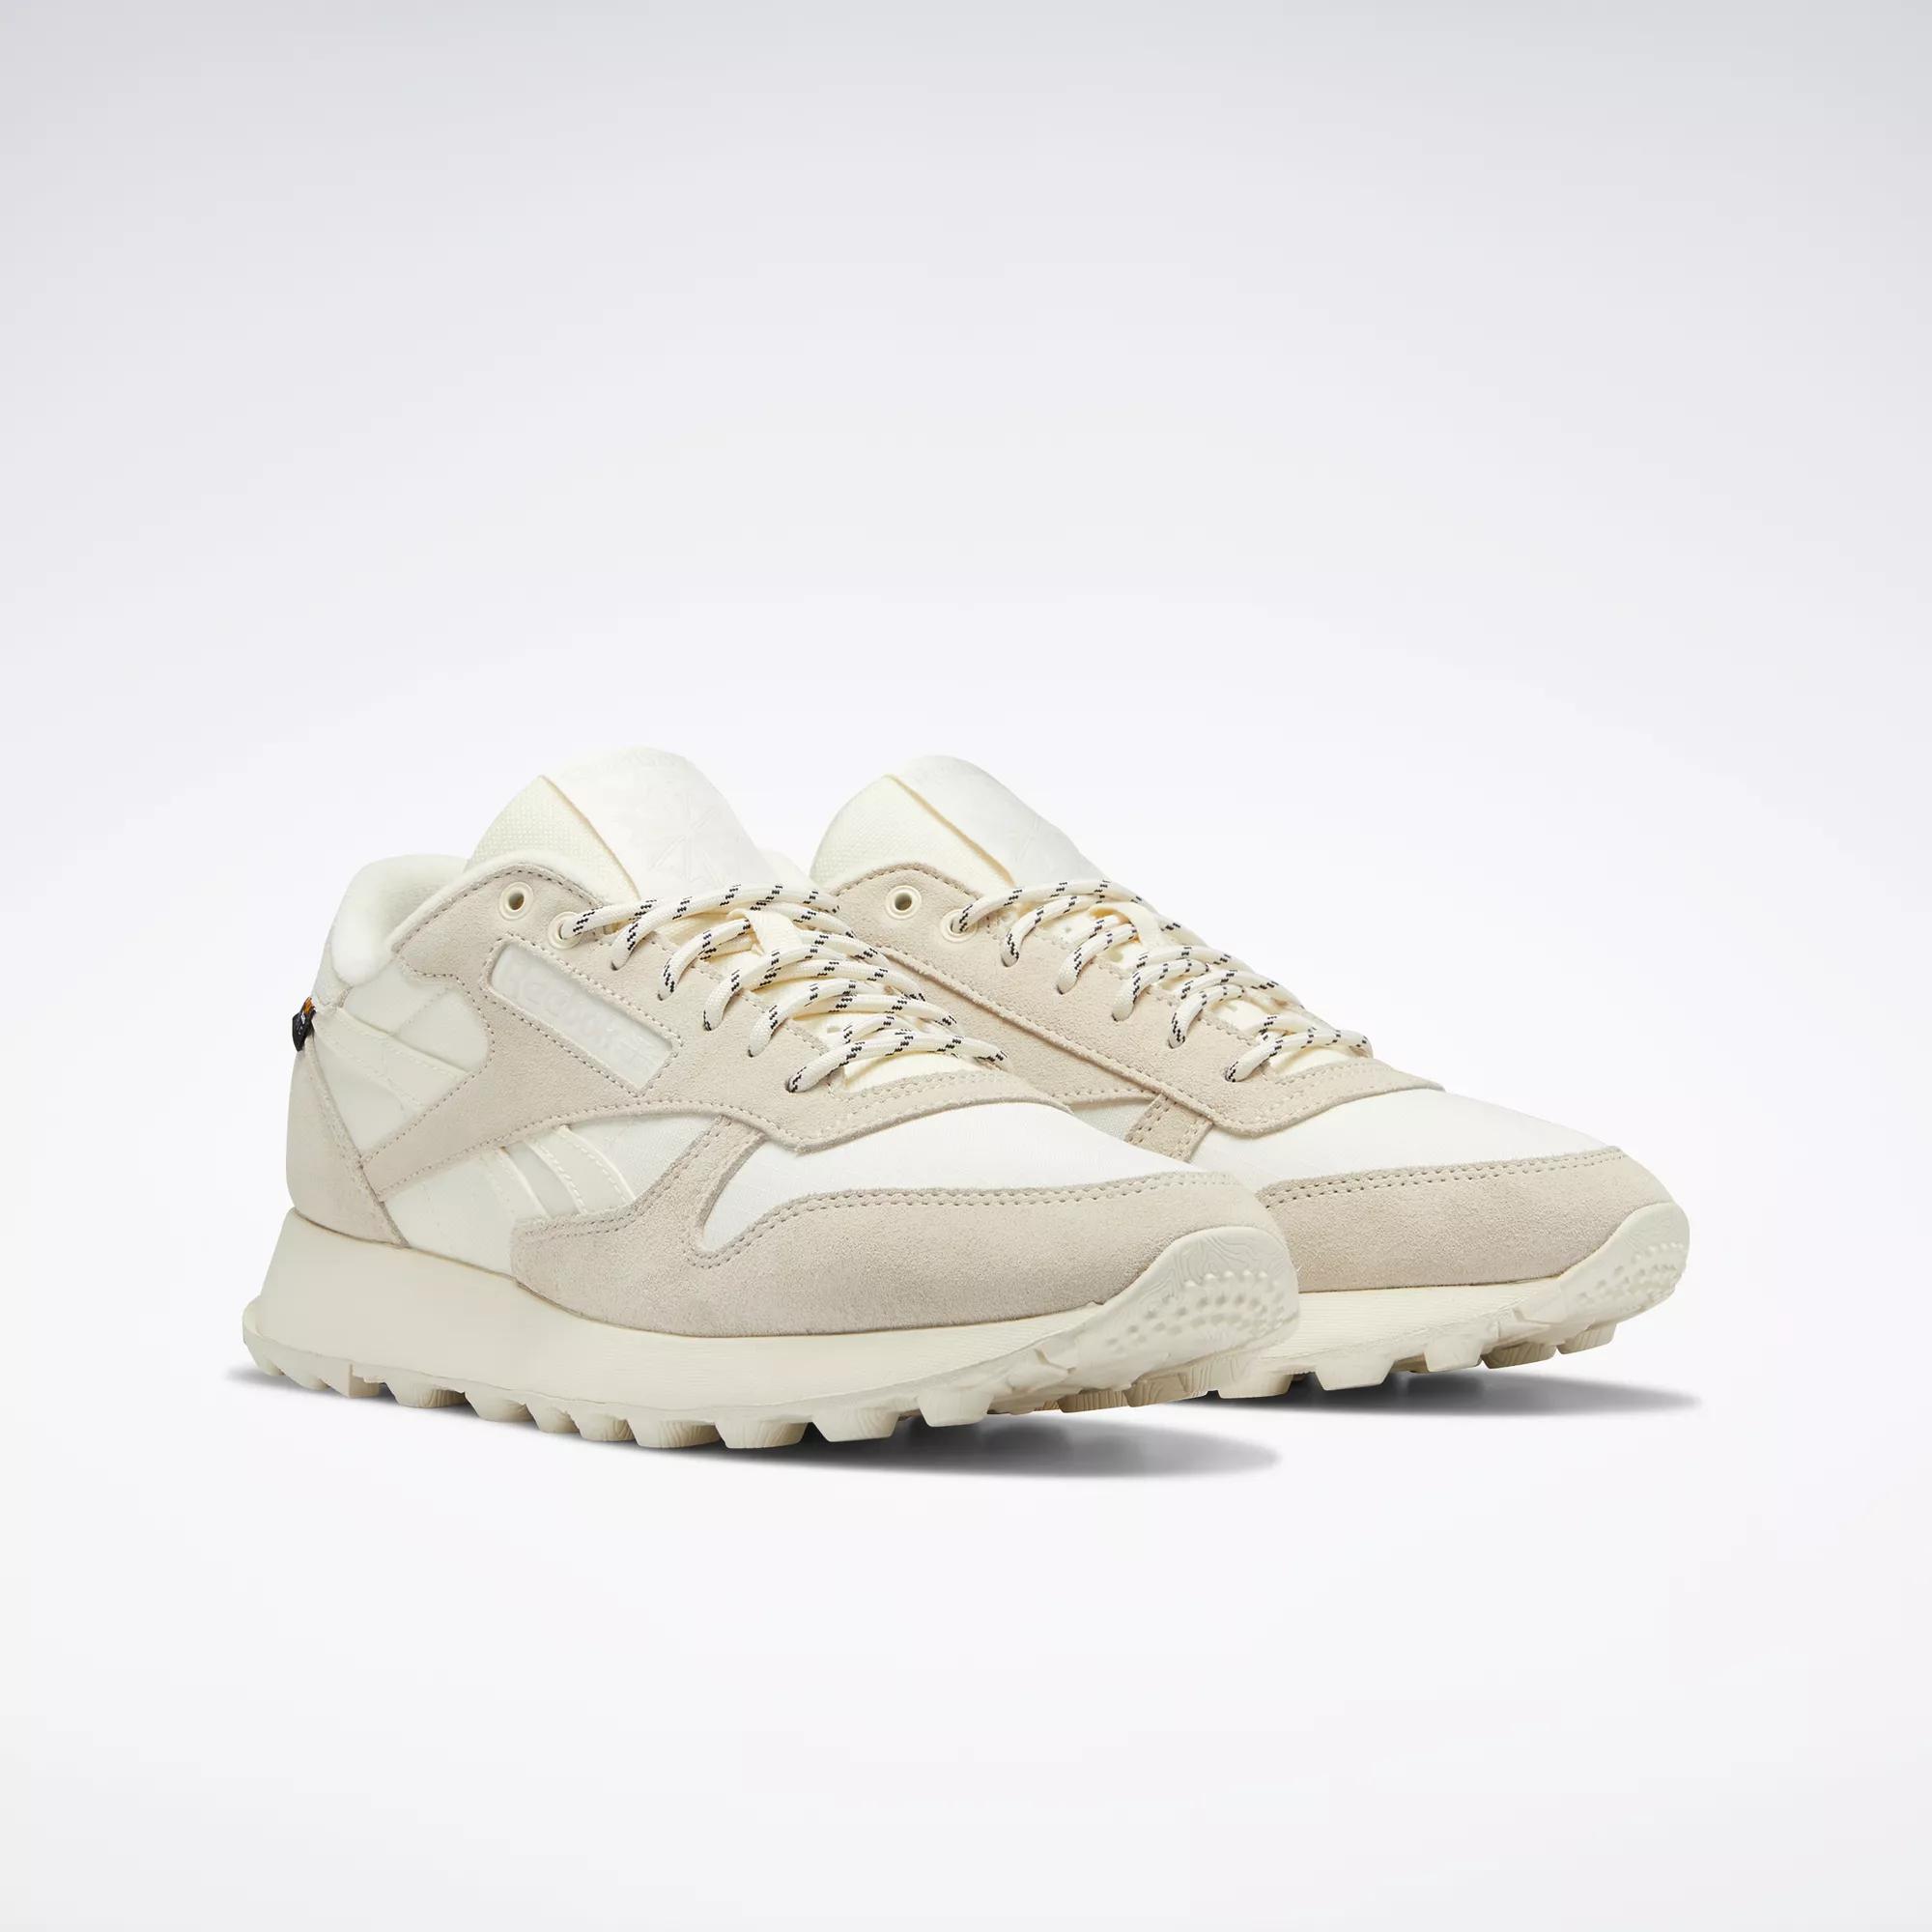 Tid Alternativt forslag Spanien Classic Leather Shoes - Classic White / Classic White / Stucco | Reebok